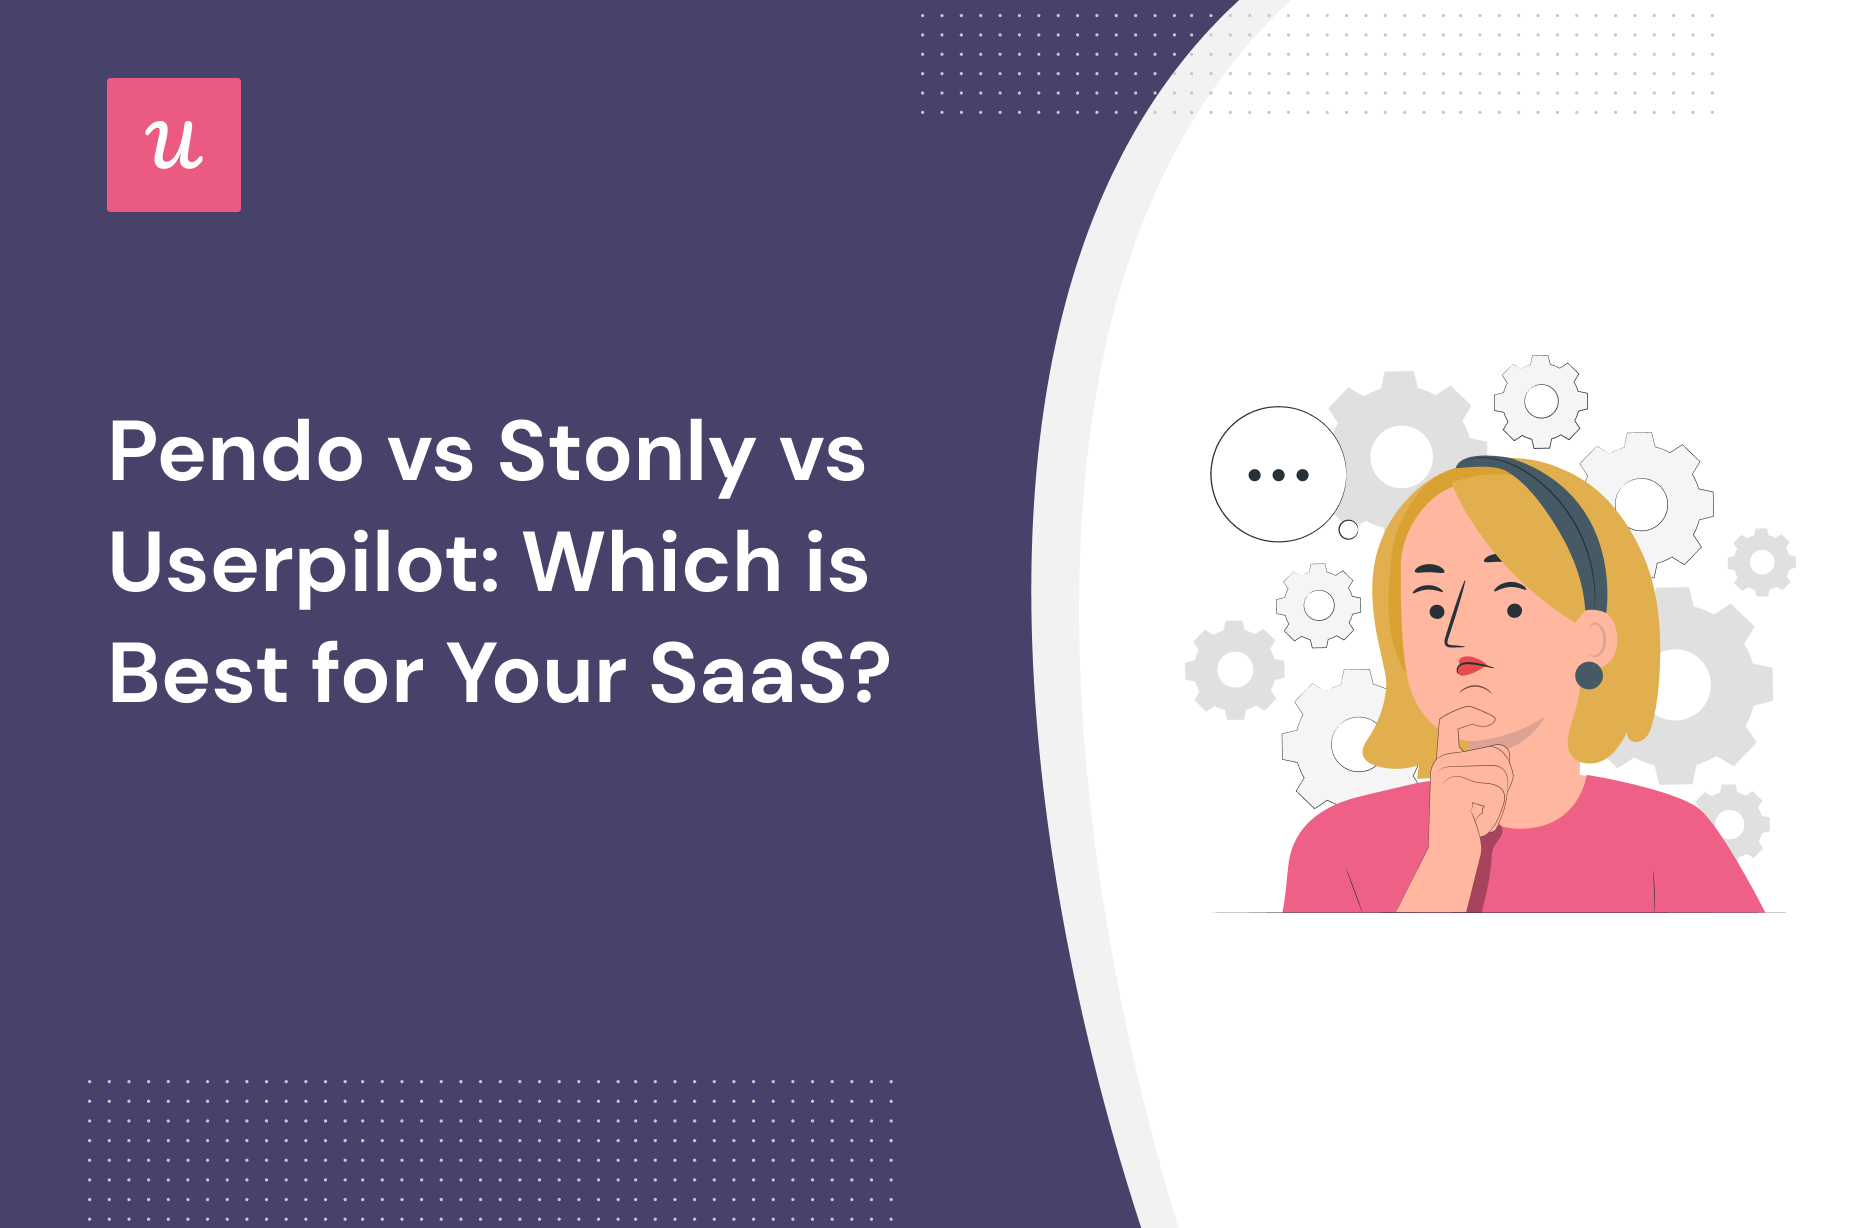 Pendo vs Stonly vs Userpilot: Which is Best for Your SaaS?